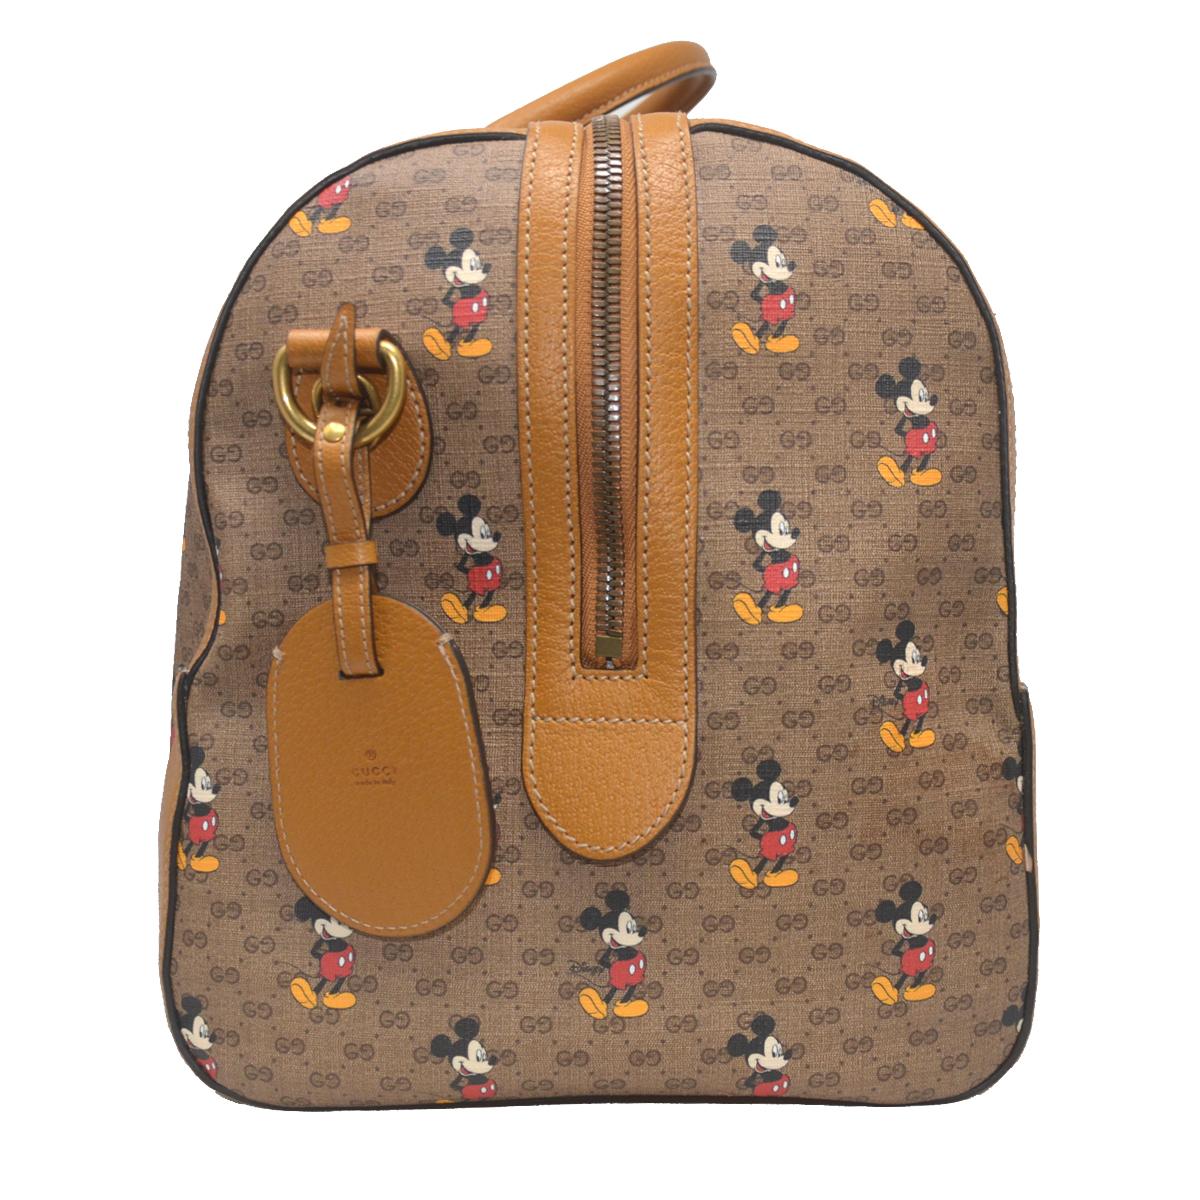 Gucci X Disney Mickey Mouse Monogram Duffel Travel Bag  In Excellent Condition For Sale In Boca Raton, FL